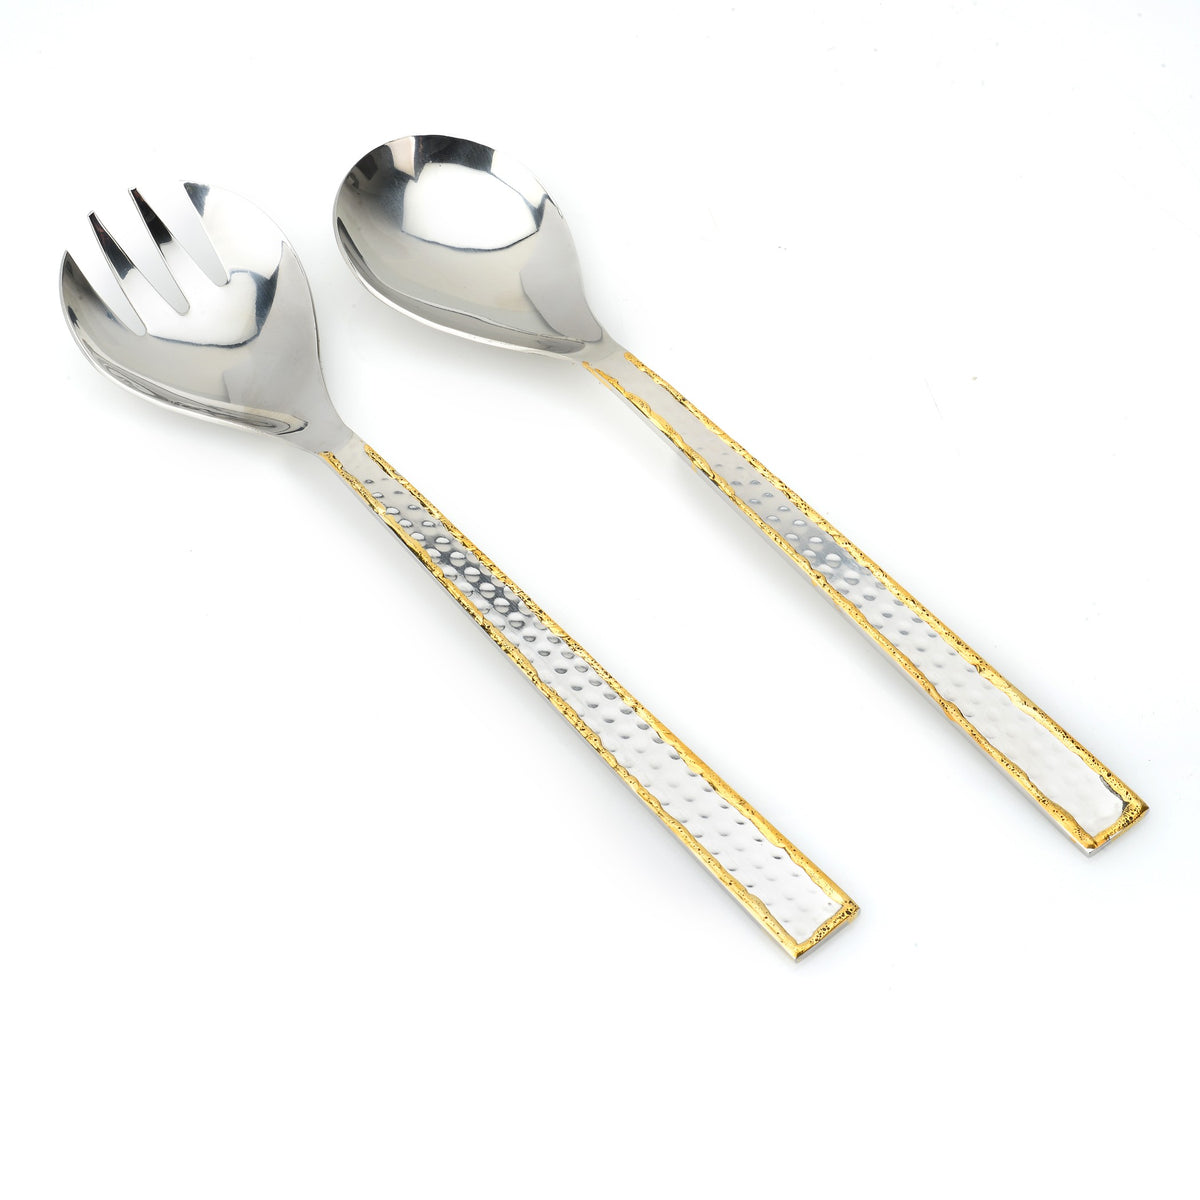 Classic Touch Set of Salad Servers with Silver/Gold Combo